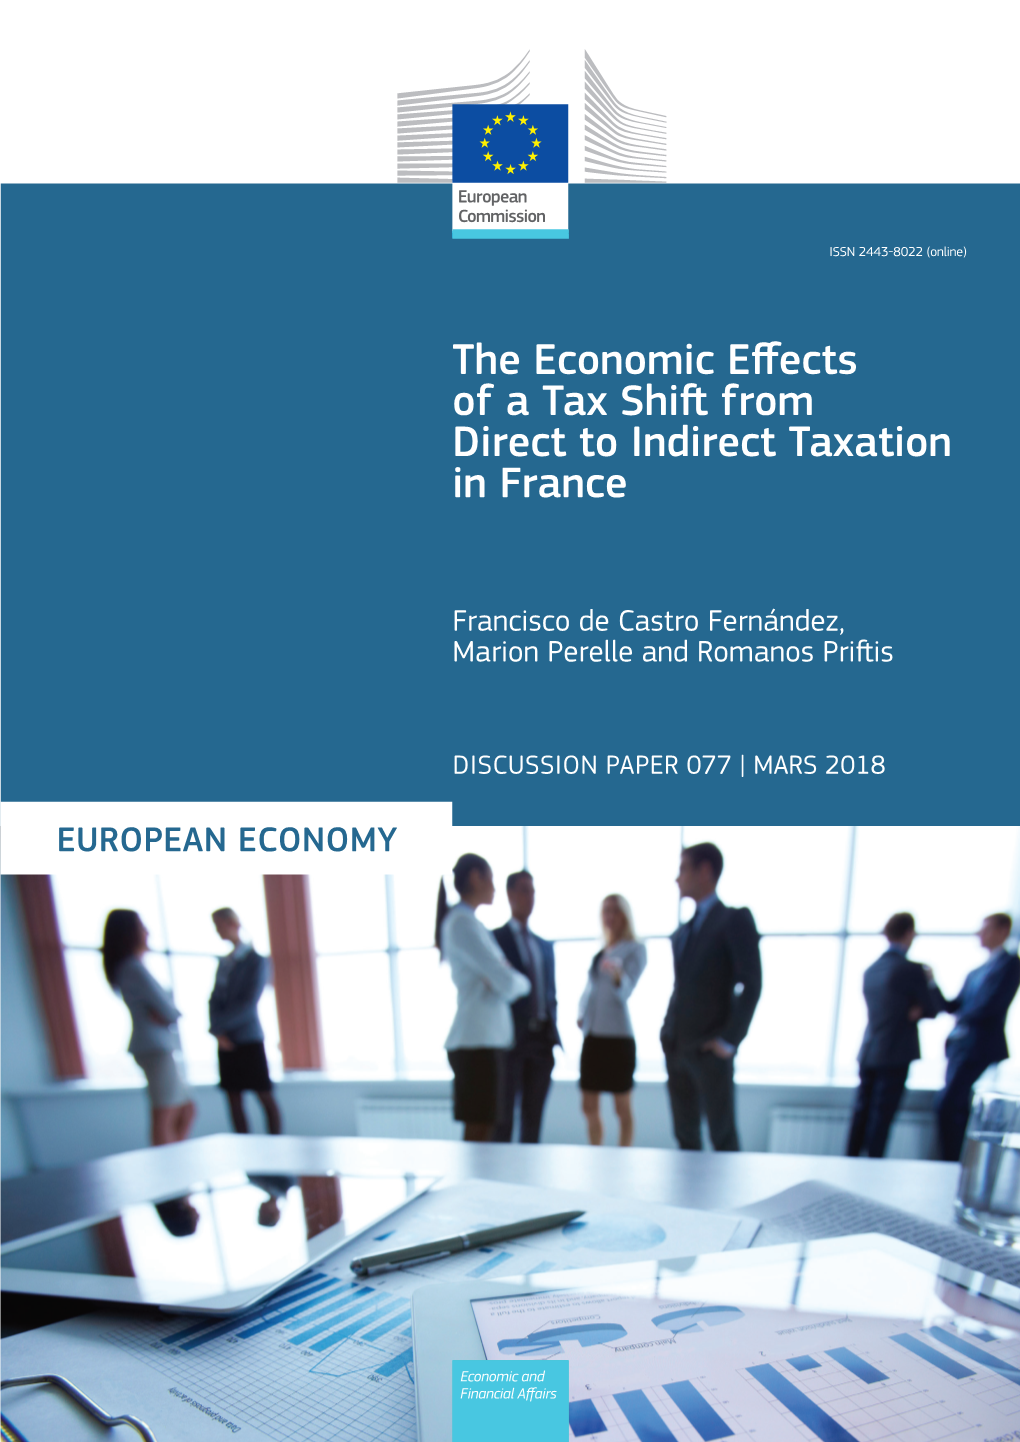 The Economic Effects of a Tax Shift from Direct to Indirect Taxation in France